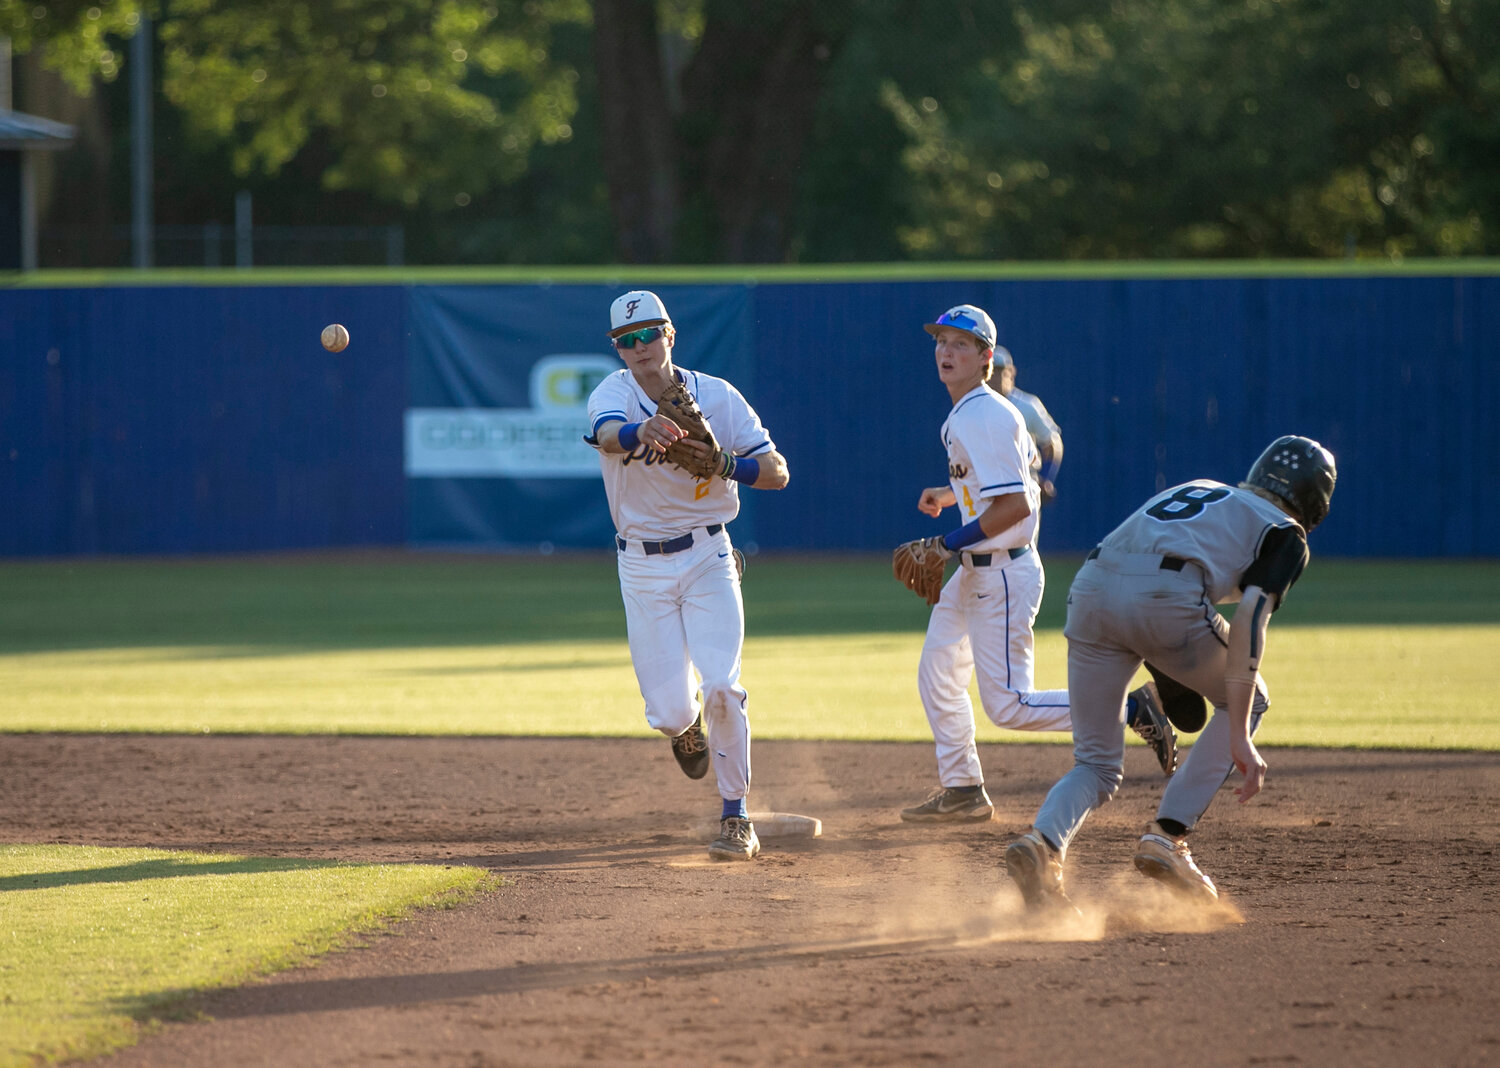 After Fairhope senior Ben Moseley stepped on second for the first out, he threw onto first for the second out of a double play during the Pirates’ second-round series against the Smiths Station Panthers at home Friday, April 28.